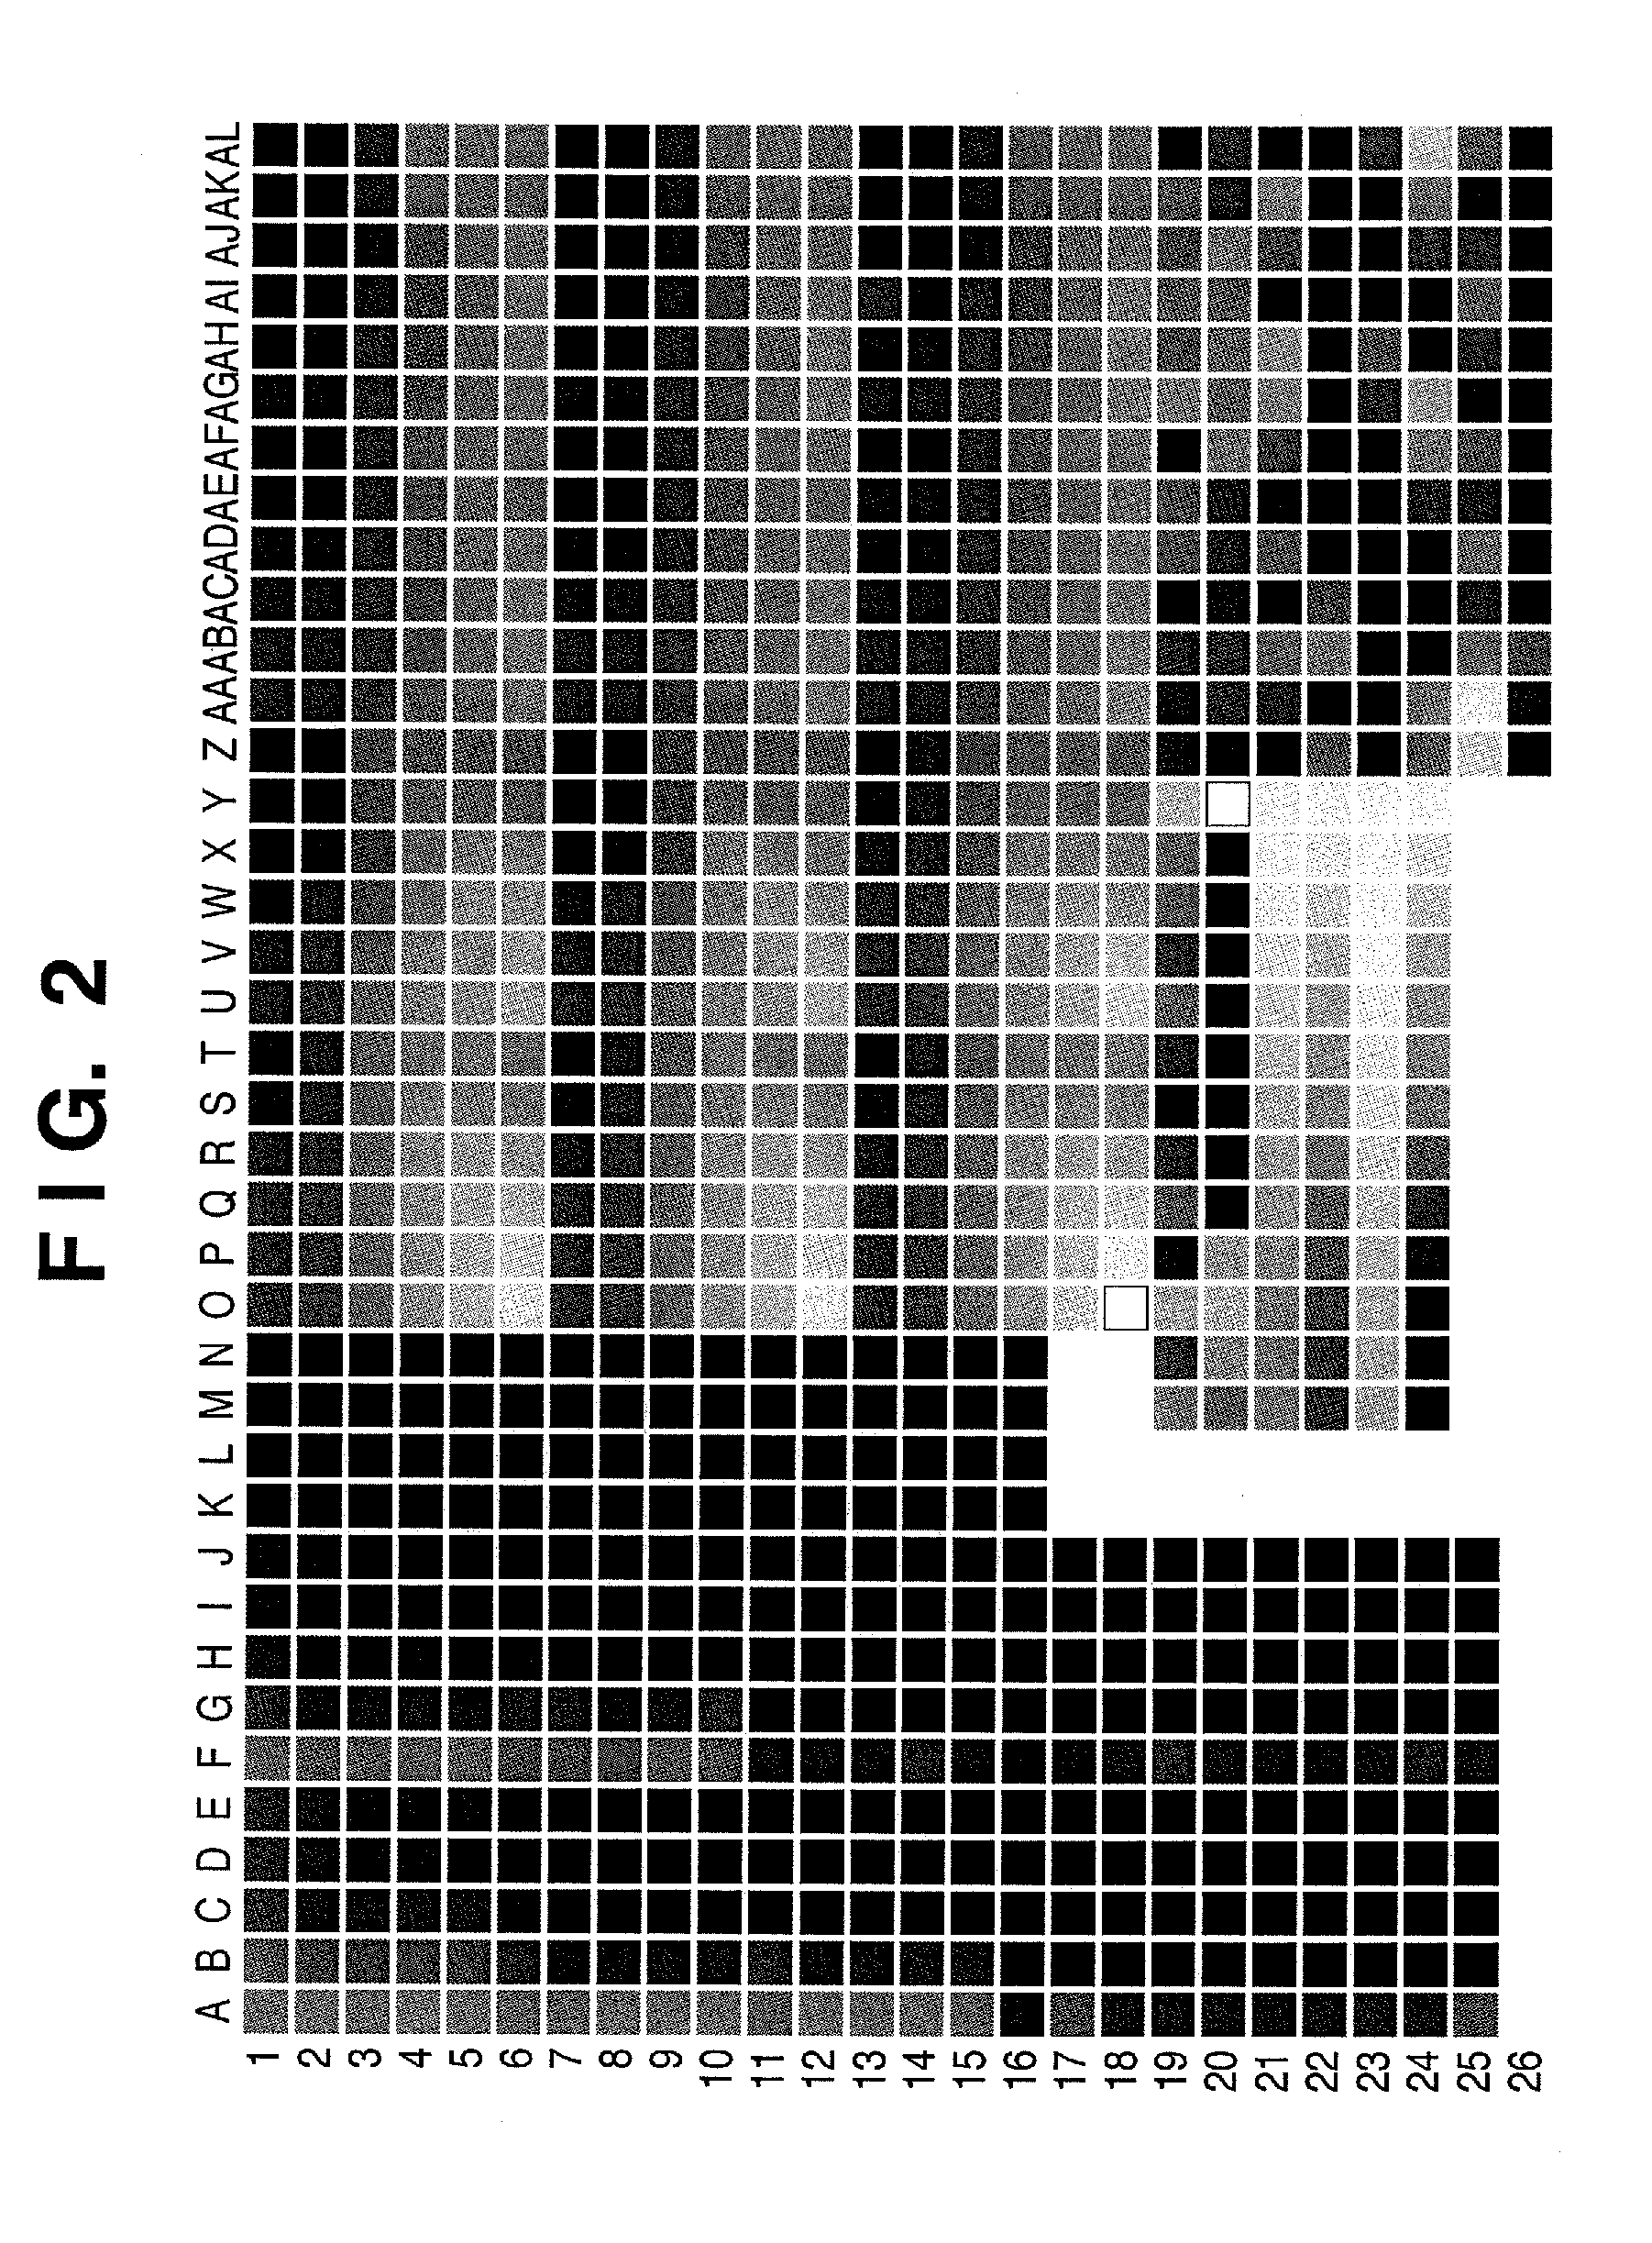 Method and apparatus for calcuating color differences on measured evaluation charts to evaluate color reproducibility considering image homogeneity